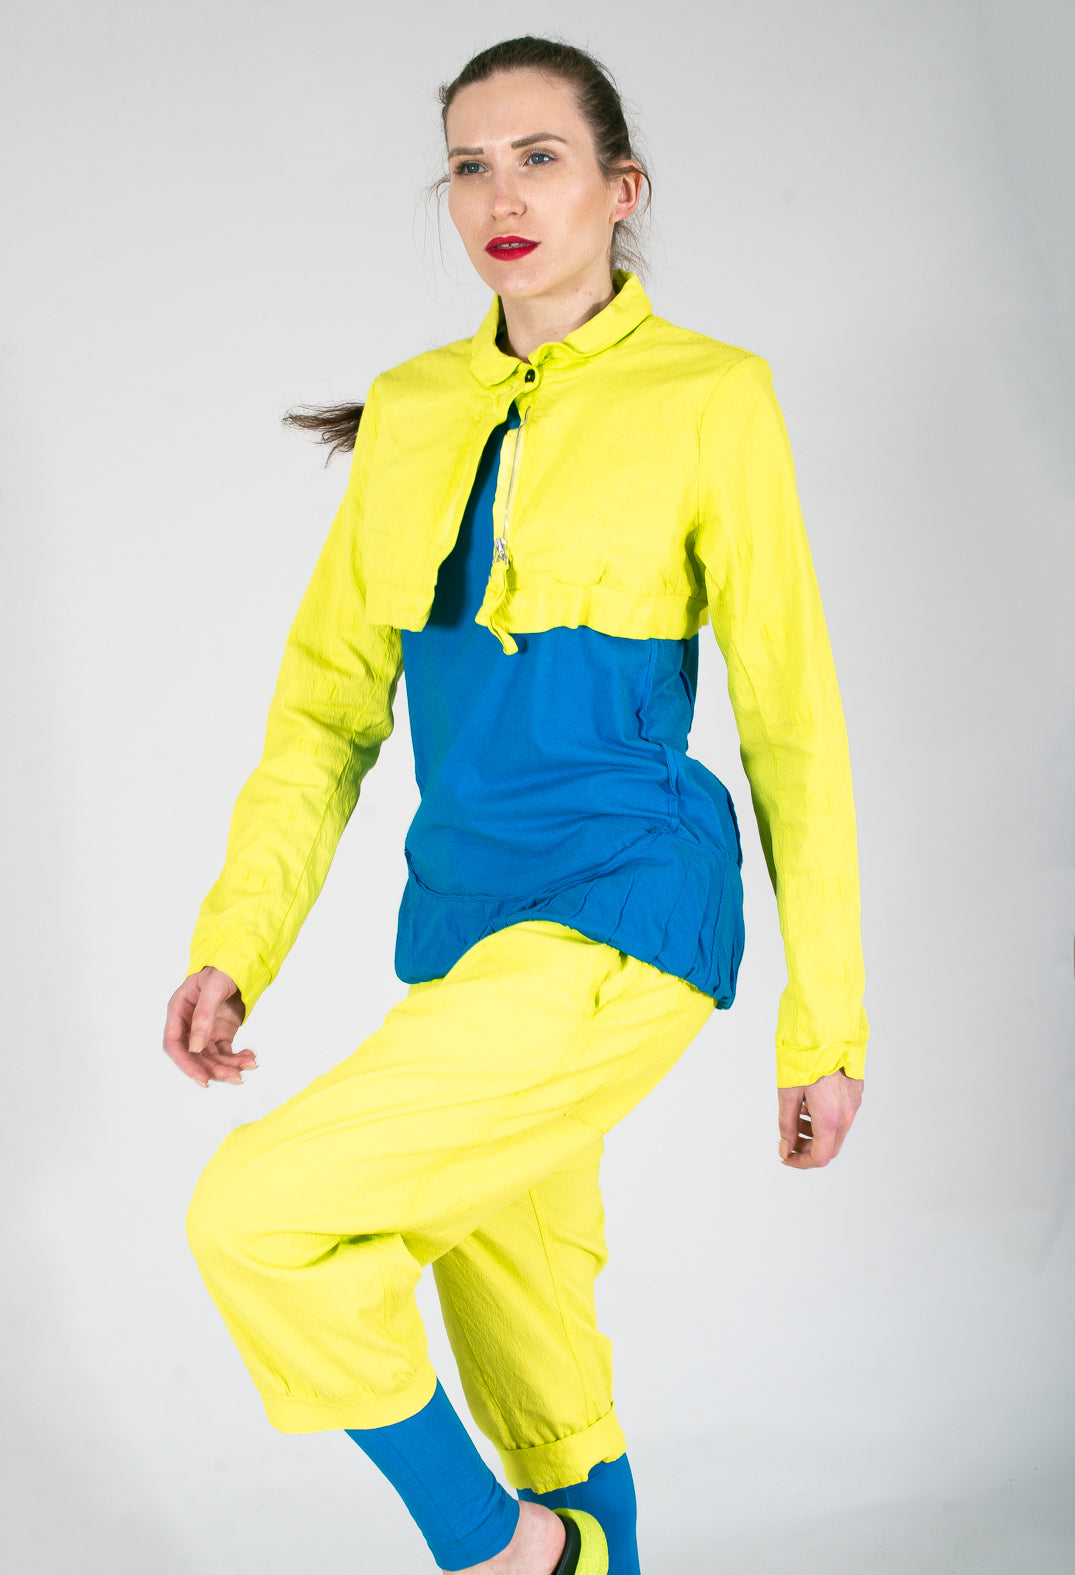 Cropped Drop Crotch Trousers in Yellow